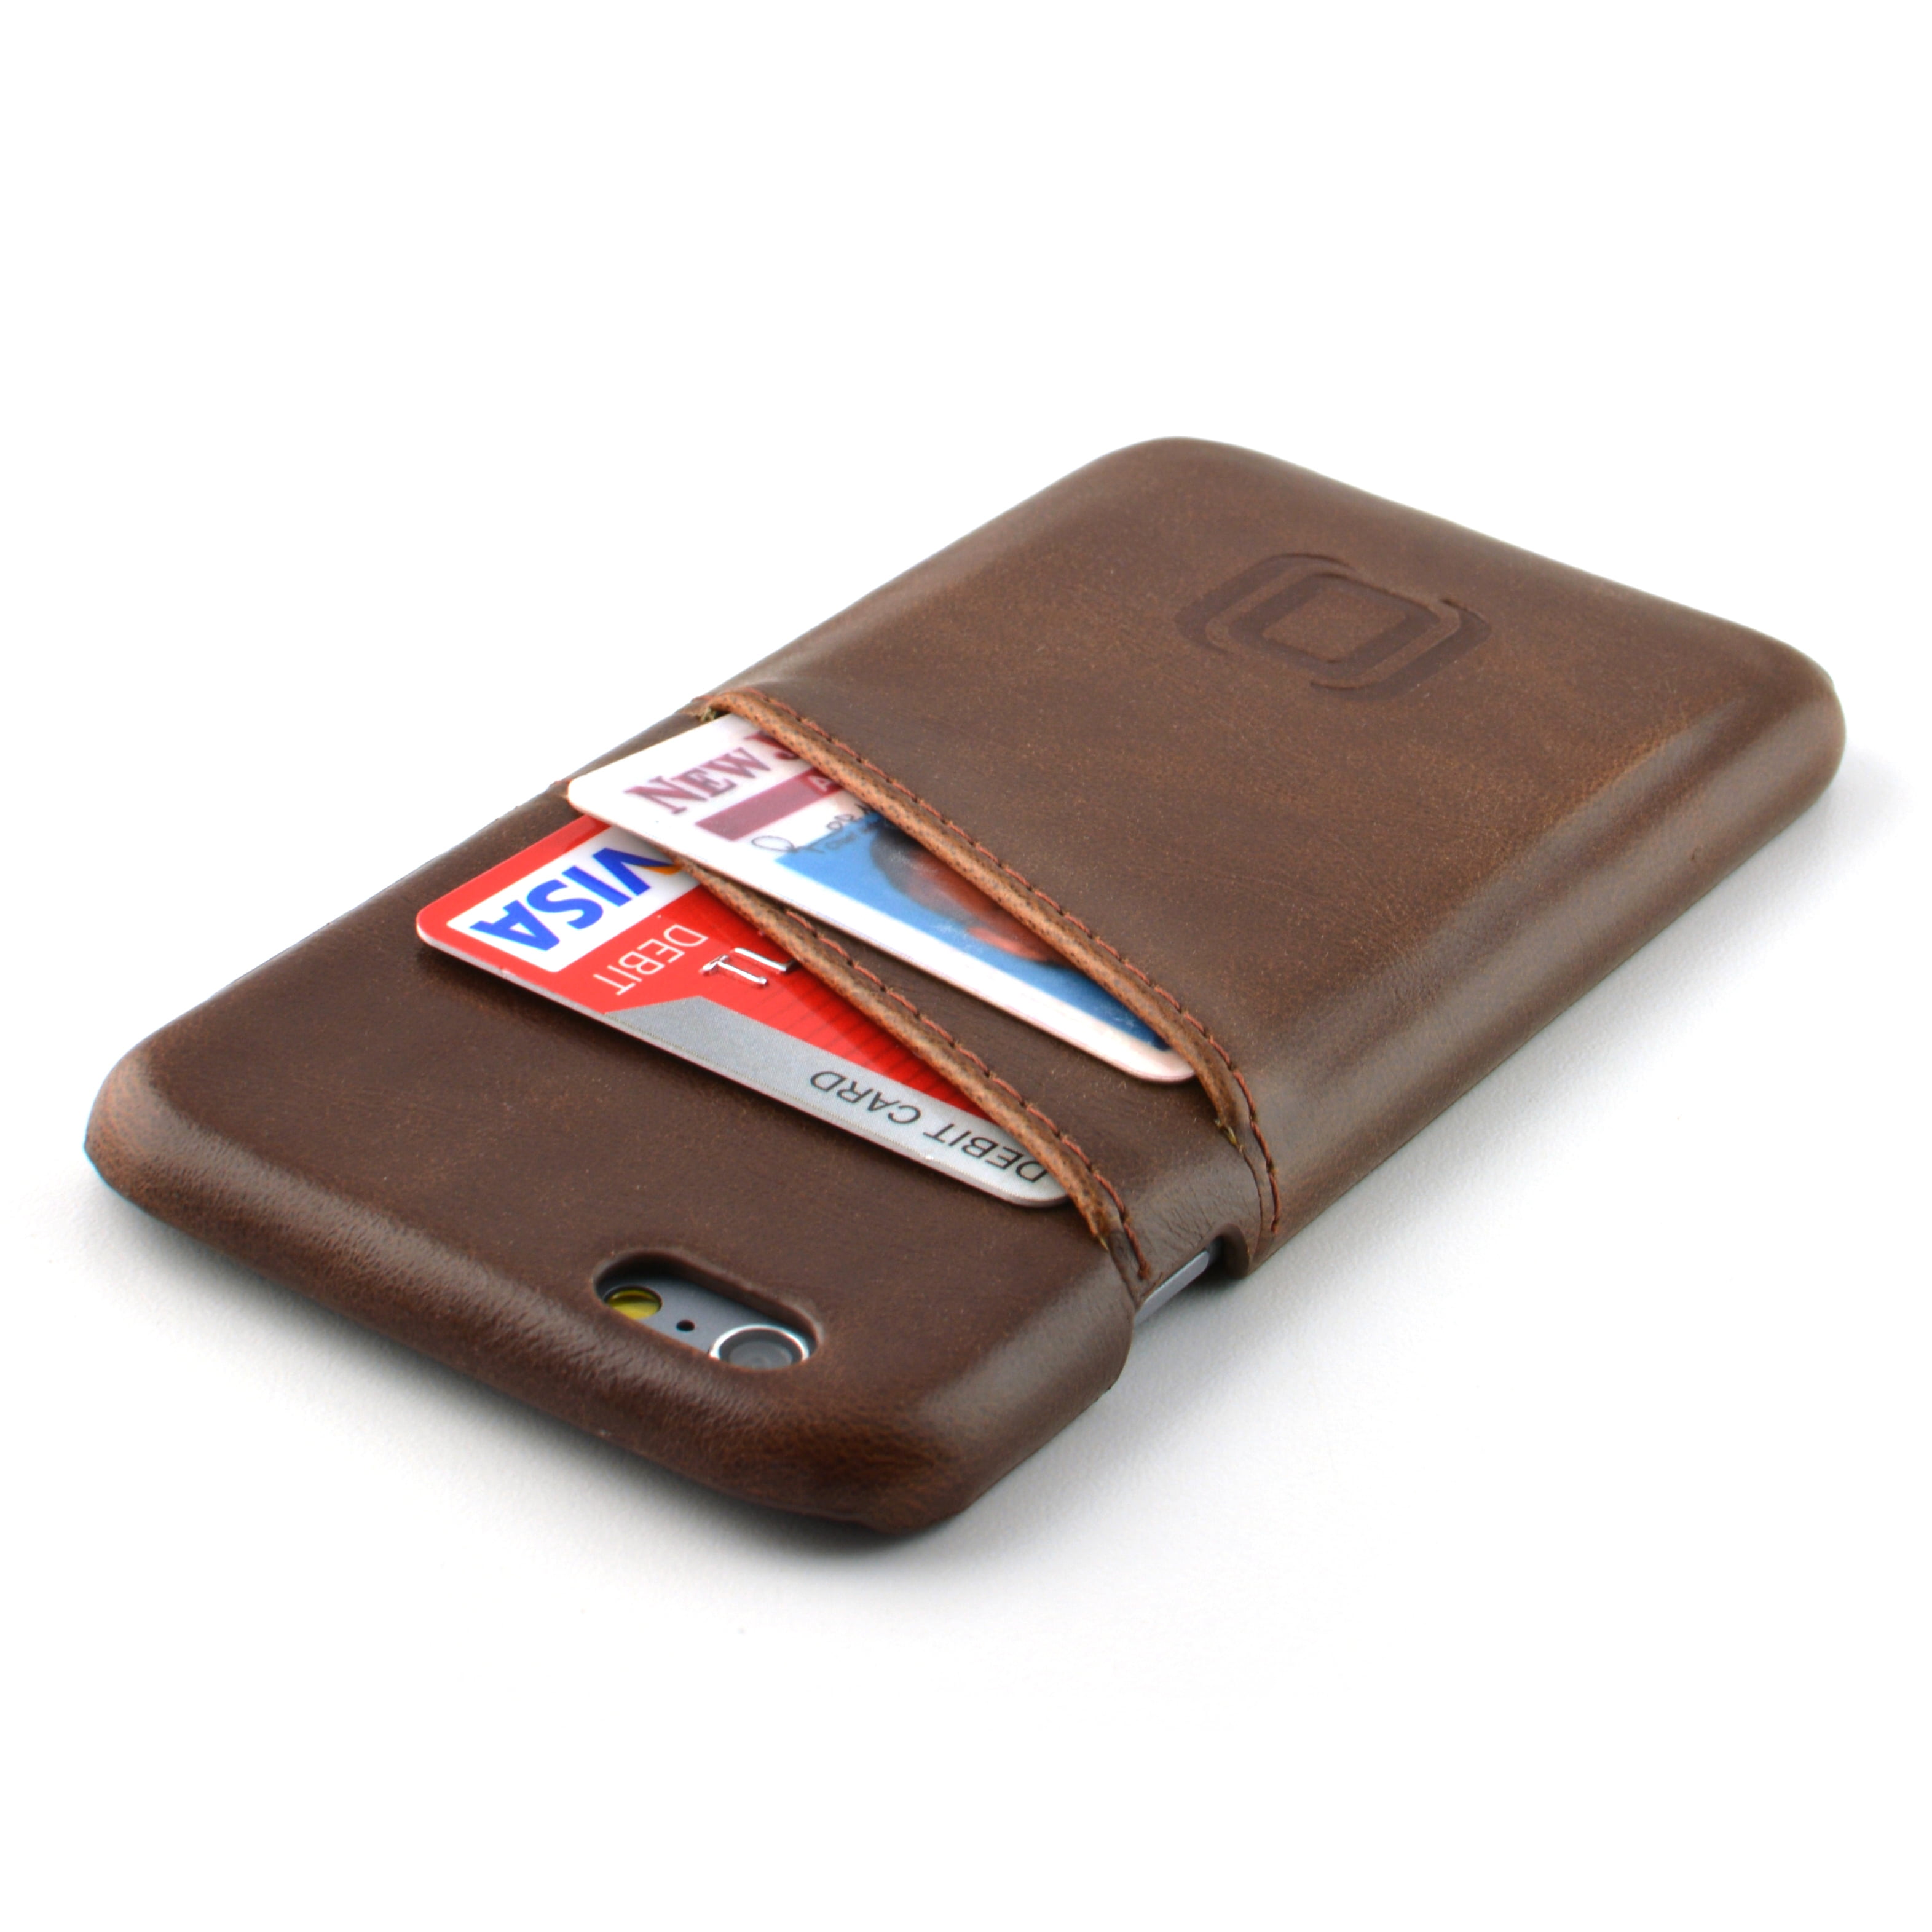 Ampère Simuleren Verkeersopstopping iPhone 6 Card Case by Dockem- Vintage Synthetic Leather Wallet Case, Ultra  Slim Professional Executive Snap On Cover with 2 Card Holder Slots, Brown -  Walmart.com